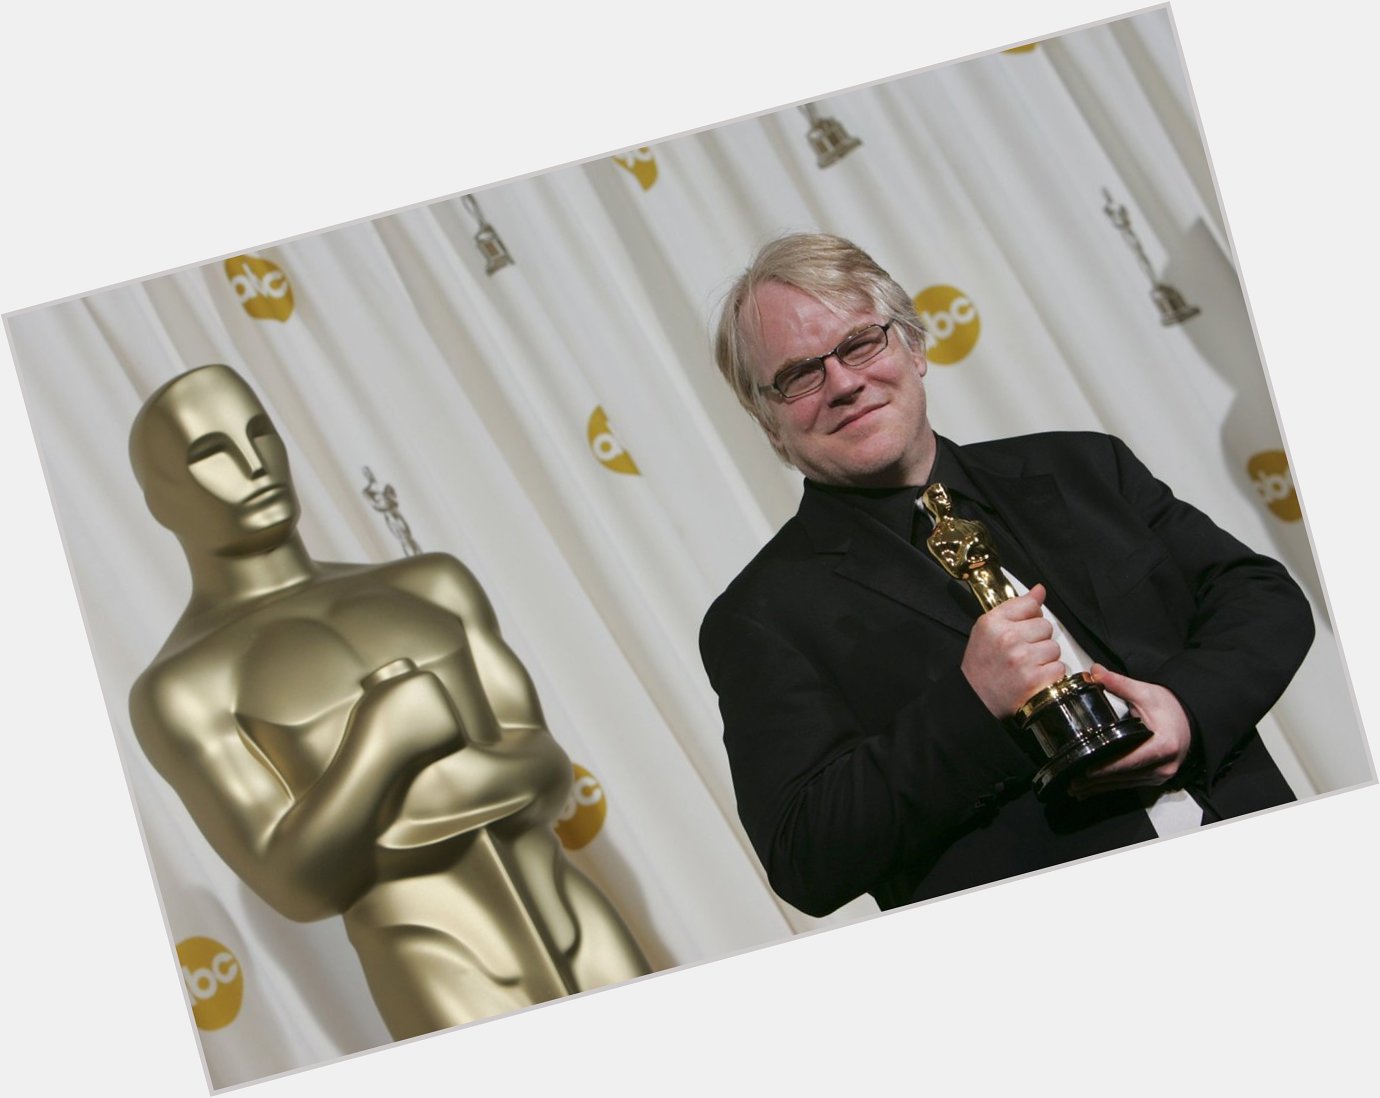 Happy Birthday to Philip Seymour Hoffman, who would have turned 50 today! 